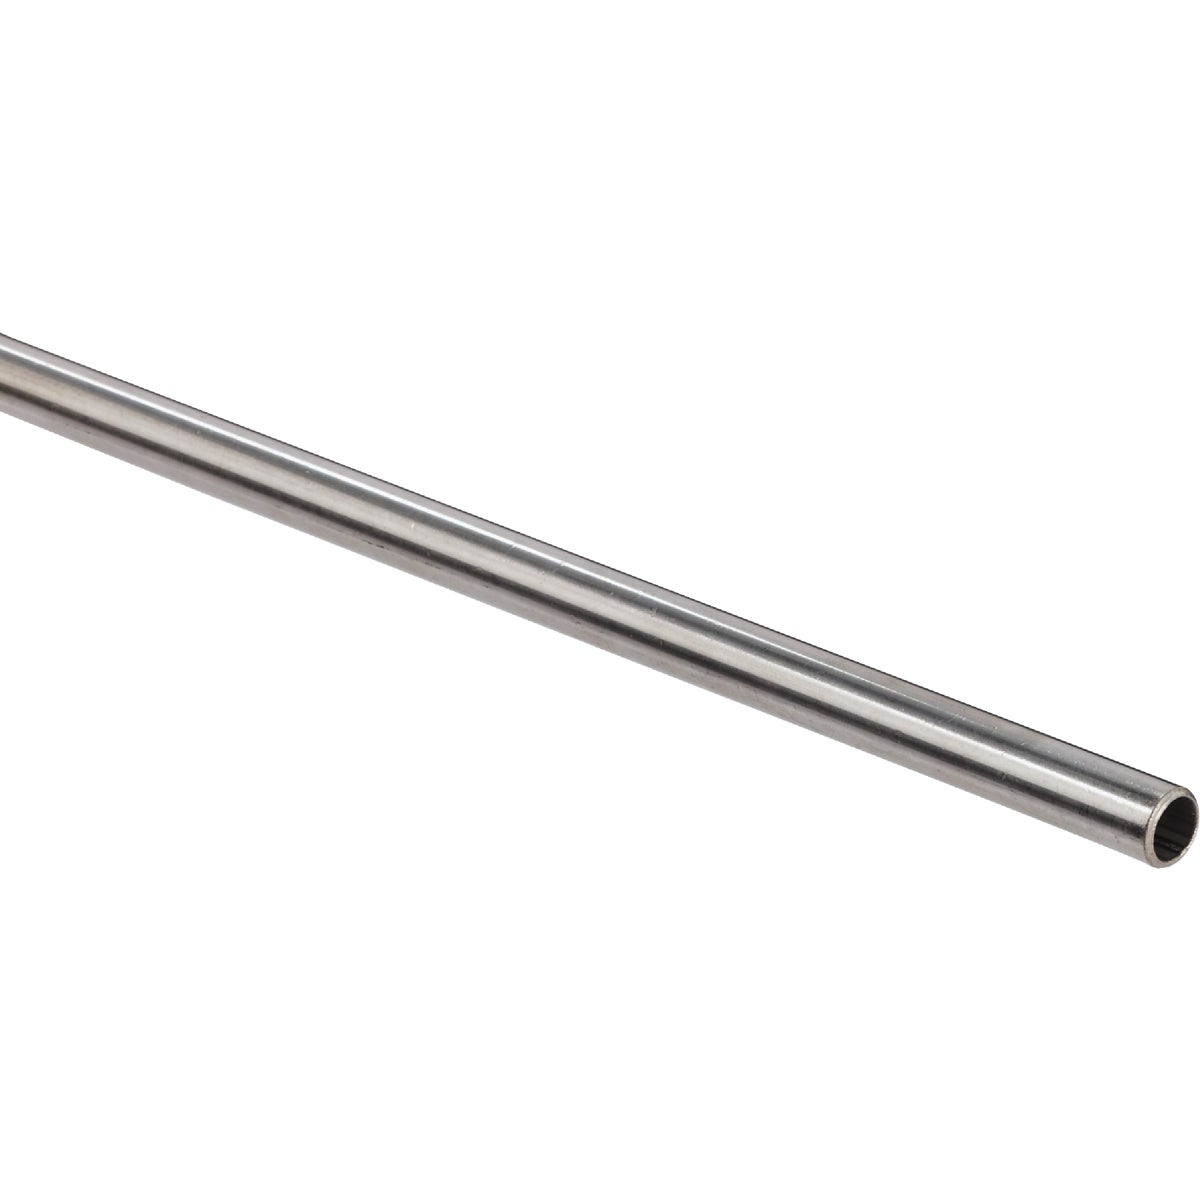 K&S Stainless Steel 3/8 In. O.D. x 1 Ft. Round Tube Stock